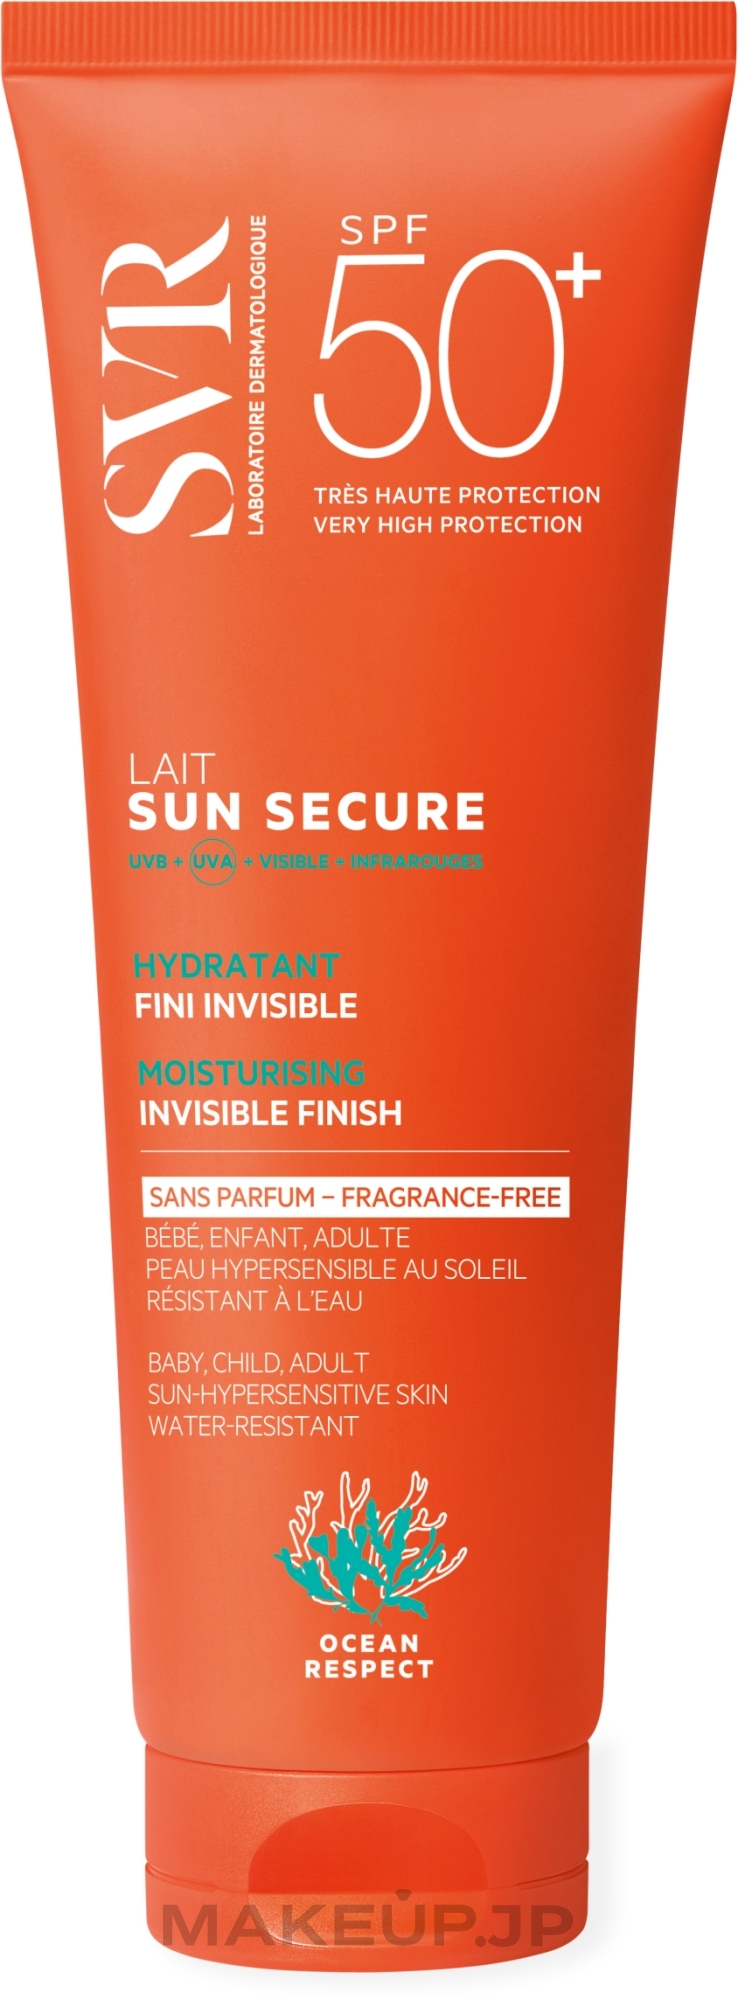 Moisturizing Tanning Lotion with Invisible Finish, fragrance-free - SVR Sun Secure Invisible Finish Moisturizing Sun Lotion SPF50 Fragrance Free — photo 250 ml